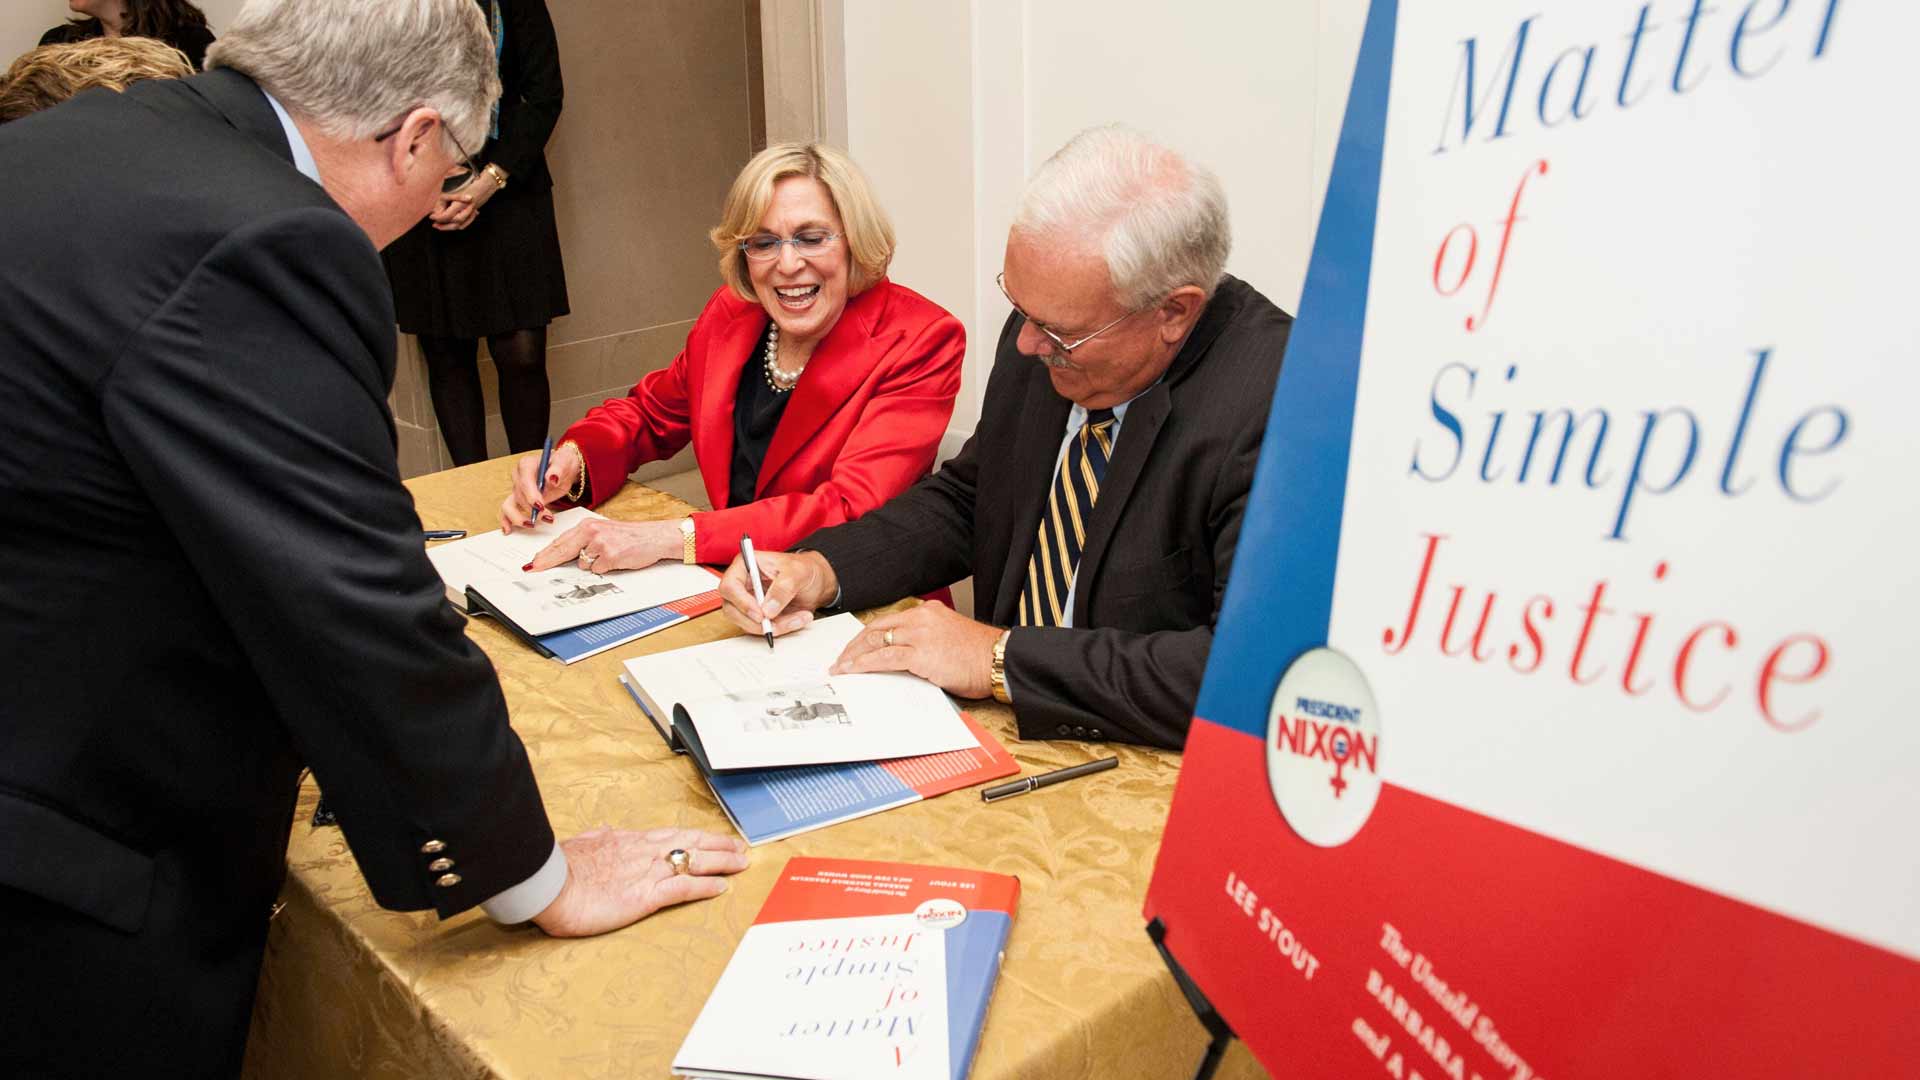 Secretary Franklin at a book signing